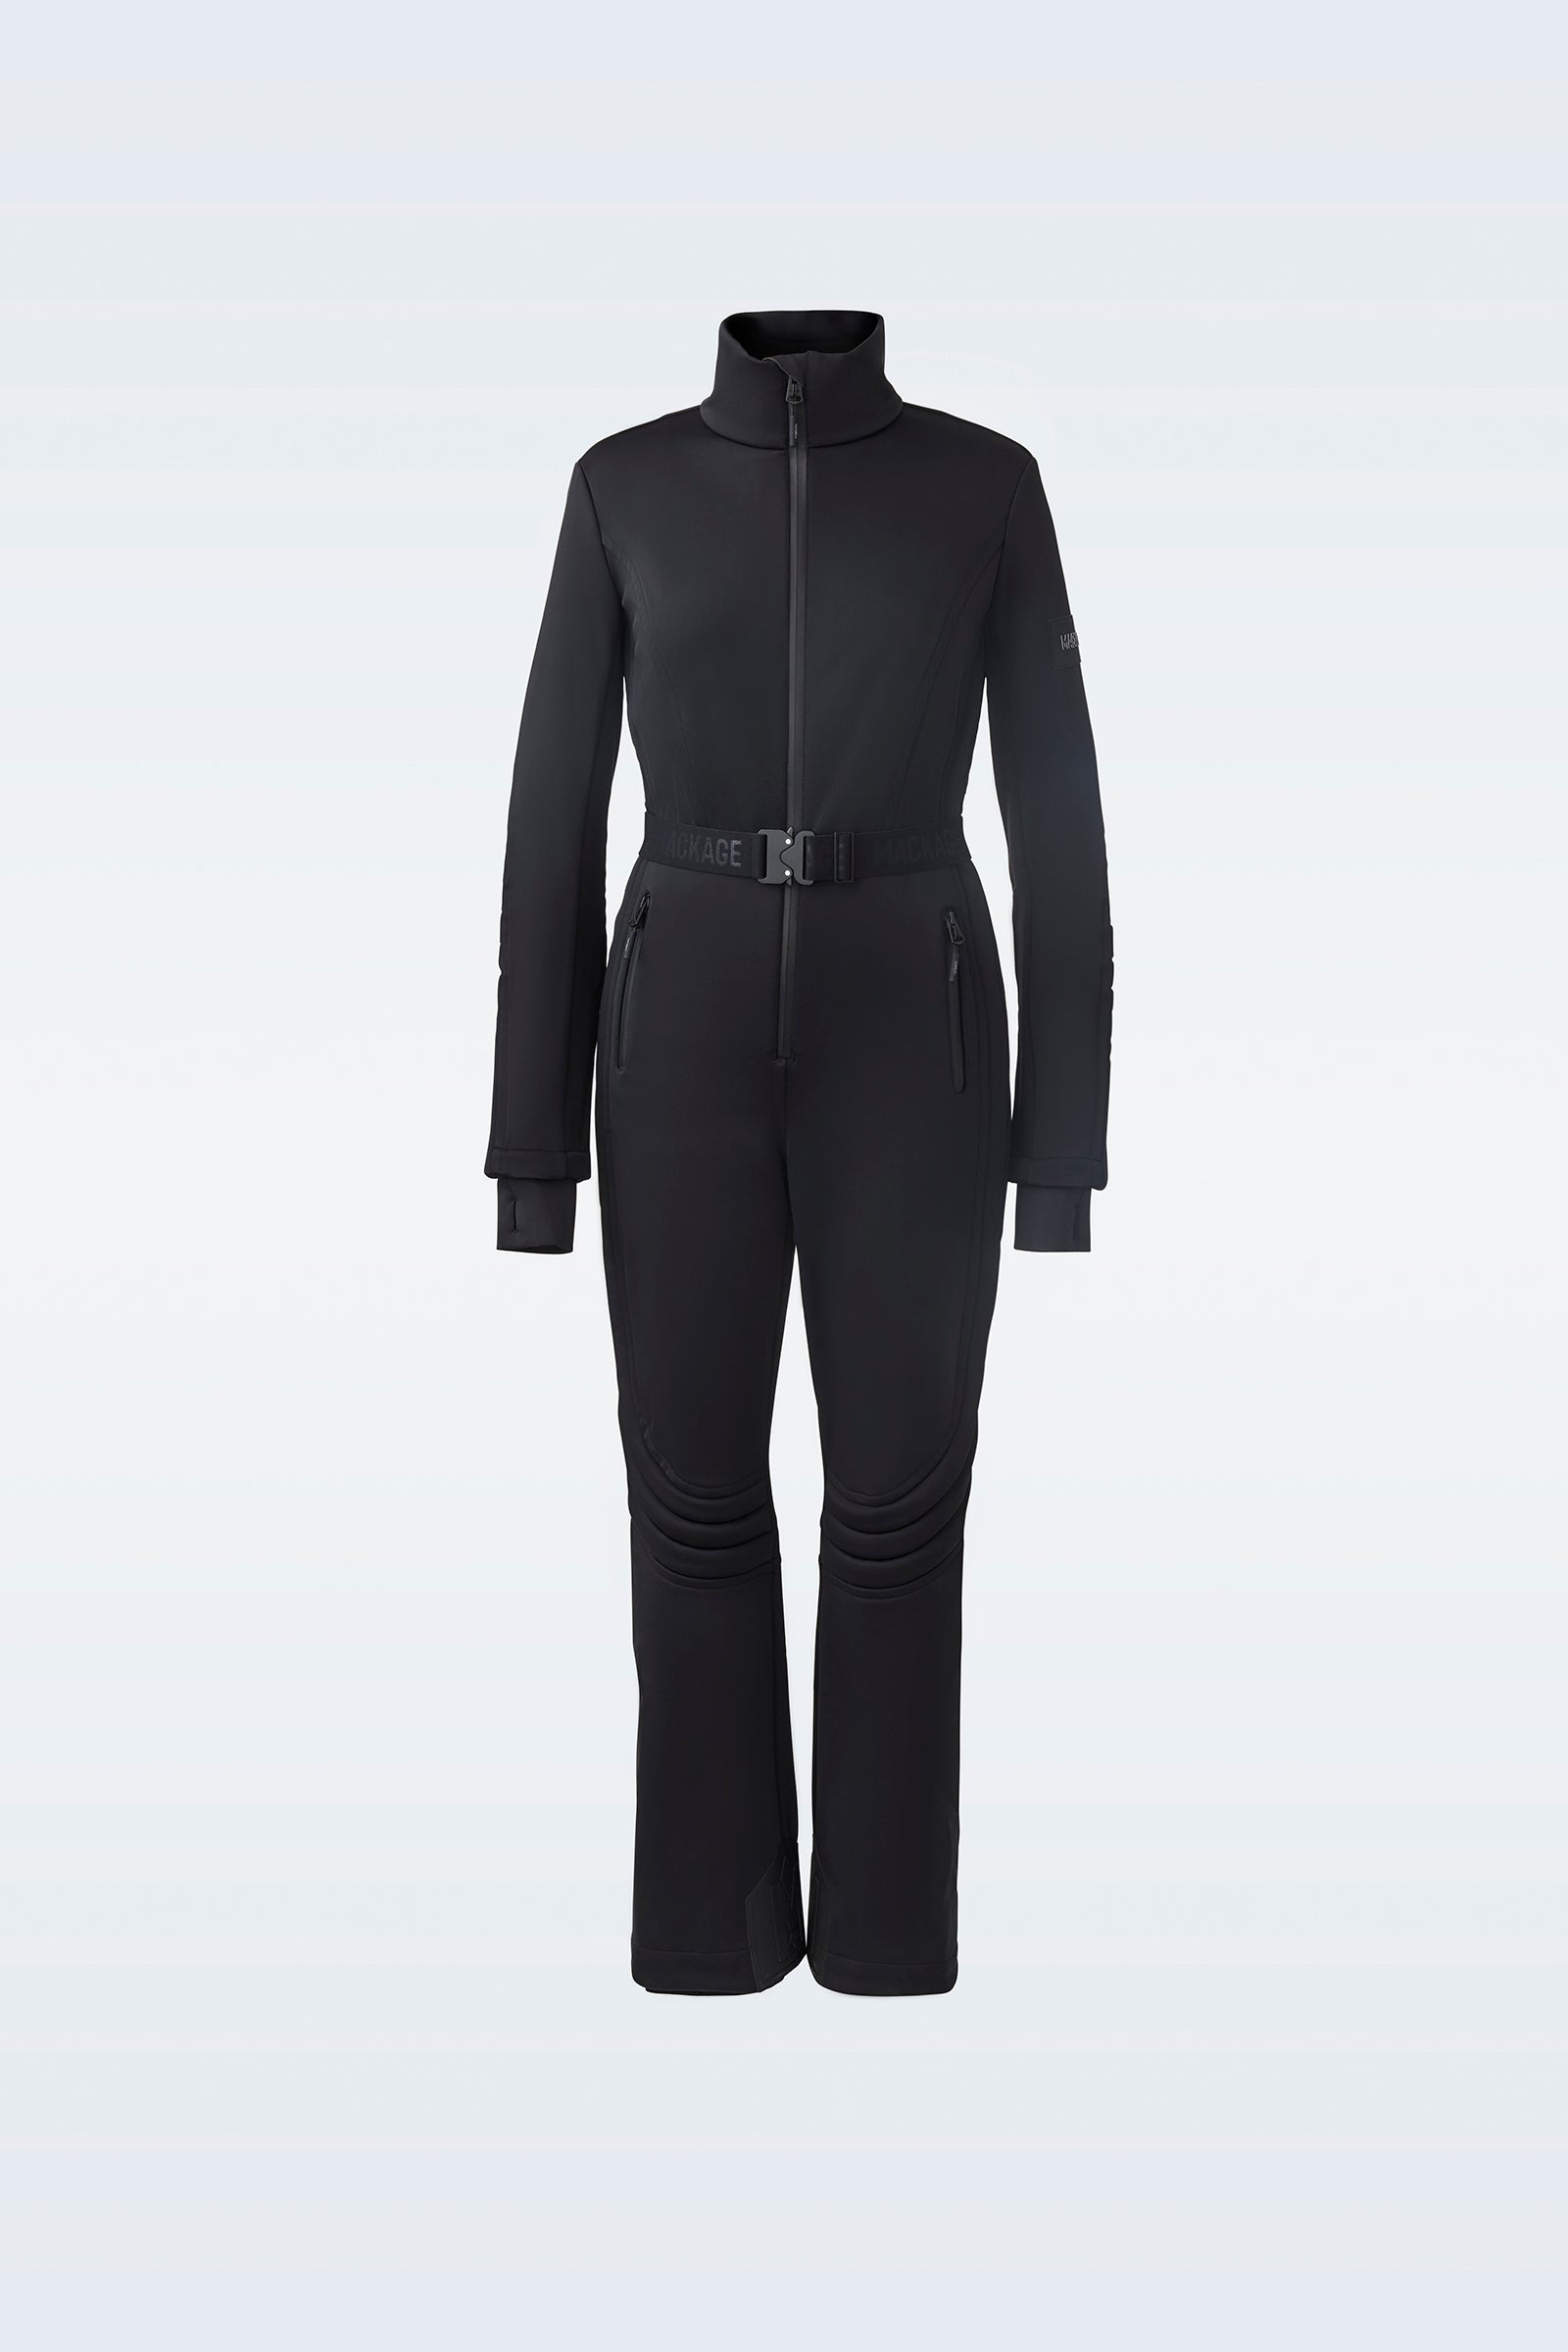 Shawna, Techno fleece US ski | knees for Mackage® suit and sleeves with articulated ladies